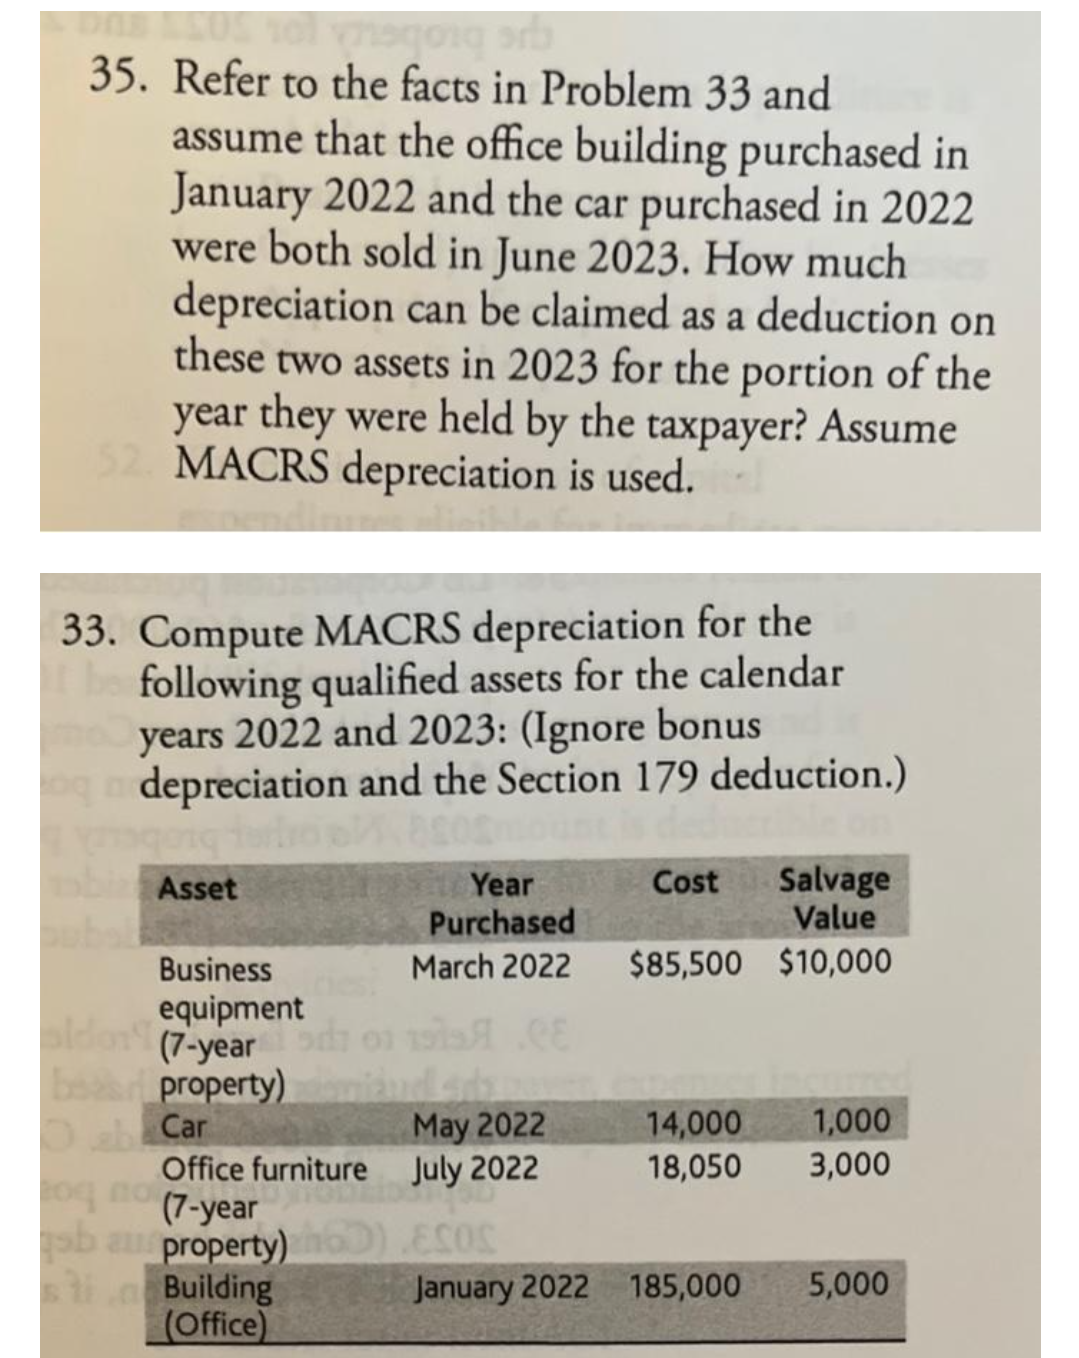 35. Refer to the facts in Problem 33 and
assume that the office building purchased in
January 2022 and the car purchased in 2022
were both sold in June 2023. How much
depreciation can be claimed as a deduction on
these two assets in 2023 for the portion of the
year they were held by the taxpayer? Assume
52. MACRS depreciation is used.
33. Compute MACRS depreciation for the
following qualified assets for the calendar
years 2022 and 2023: (Ignore bonus
oq n depreciation and the Section 179 deduction.)
Asset
Year
Purchased
March 2022
ACE
Business
equipment
(7-year do
bear property)omiandsda
DrabCar
May 2022
Office furniture July 2022
(7-year
SOMER
20q
sb aur property) h60) ESOS
stia Building
(Office)
January 2022
Salvage
Value
$85,500 $10,000
Cost
14,000
1,000
18,050 3,000
185,00
5,000
0005